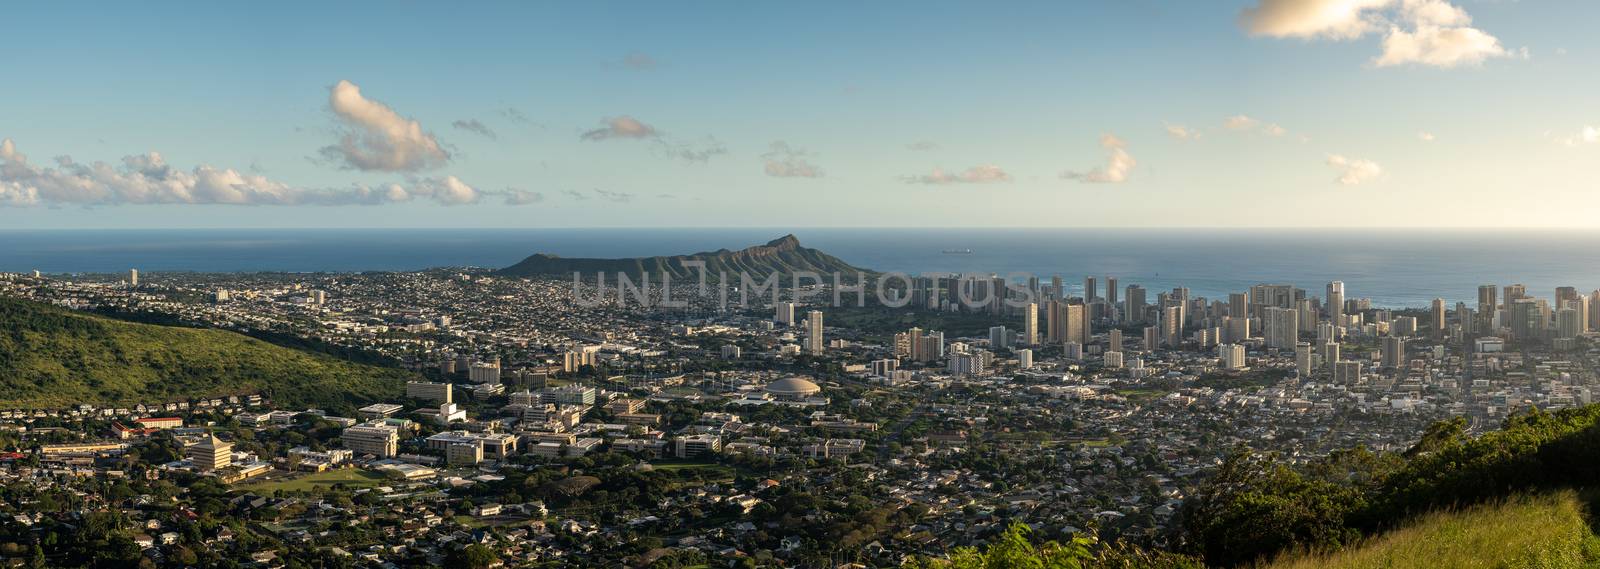 Panorama of Waikiki and Honolulu from Tantalus Overlook on Oahu by steheap